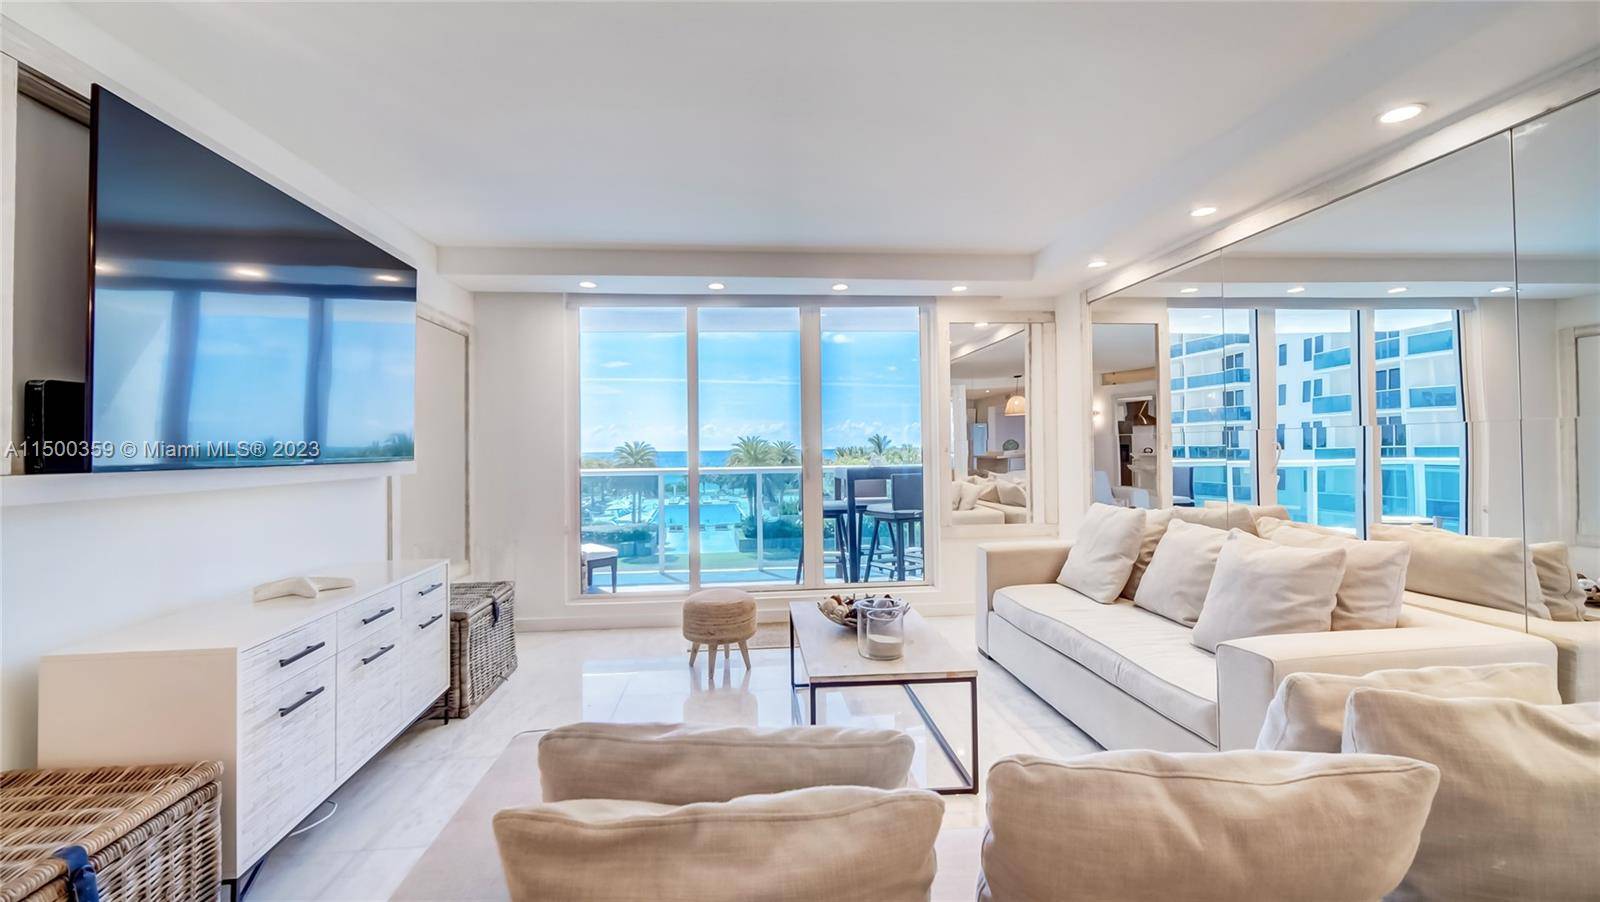 Gorgeous direct ocean view, 1 Bedroom plus den as second Bedroon and two full bathrooms The unit is updated, furnished and tastefully decorated.